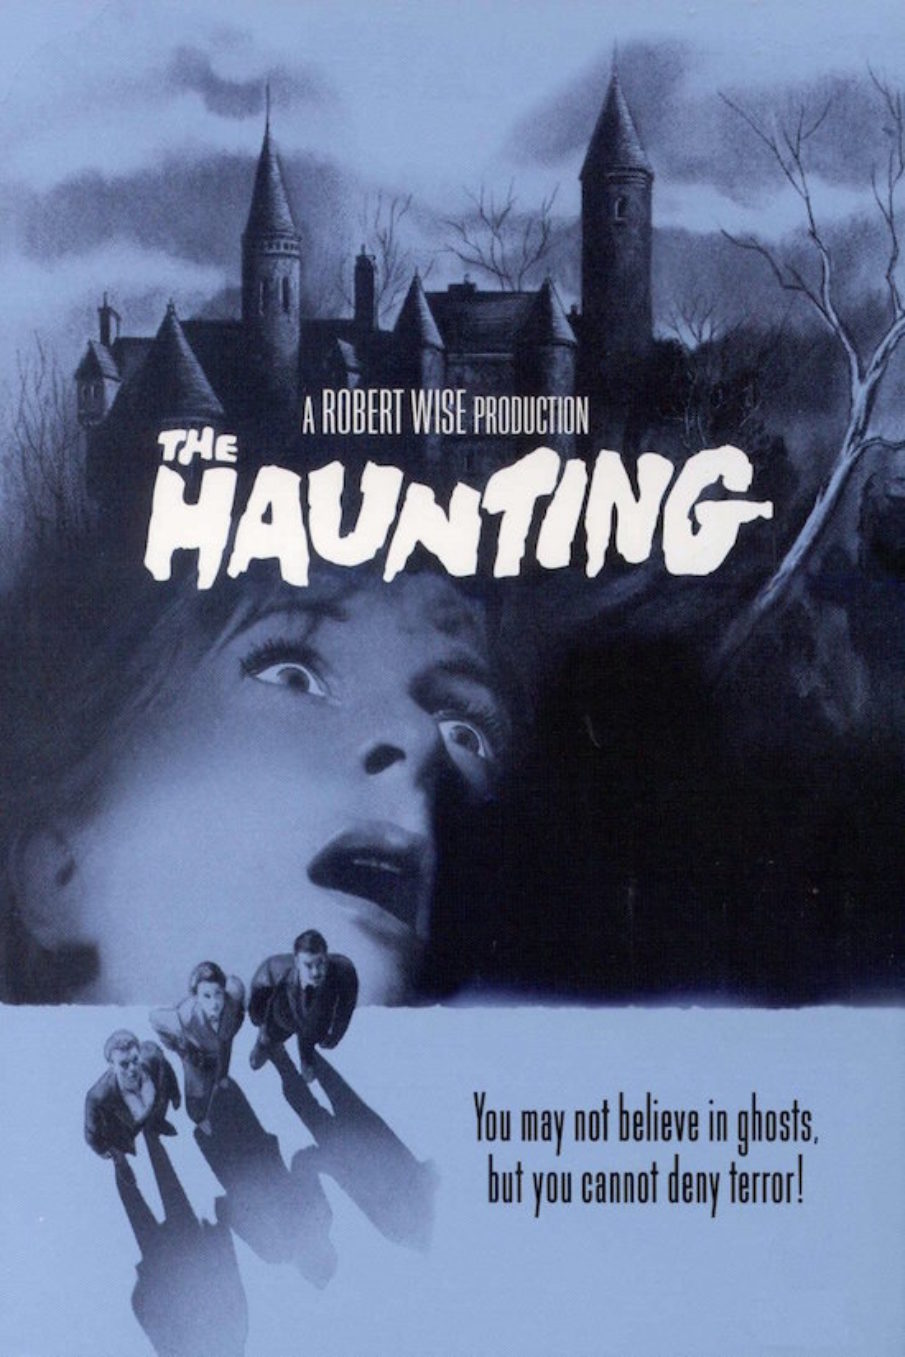 The Haunting (1963) – 31 Days of Halloween